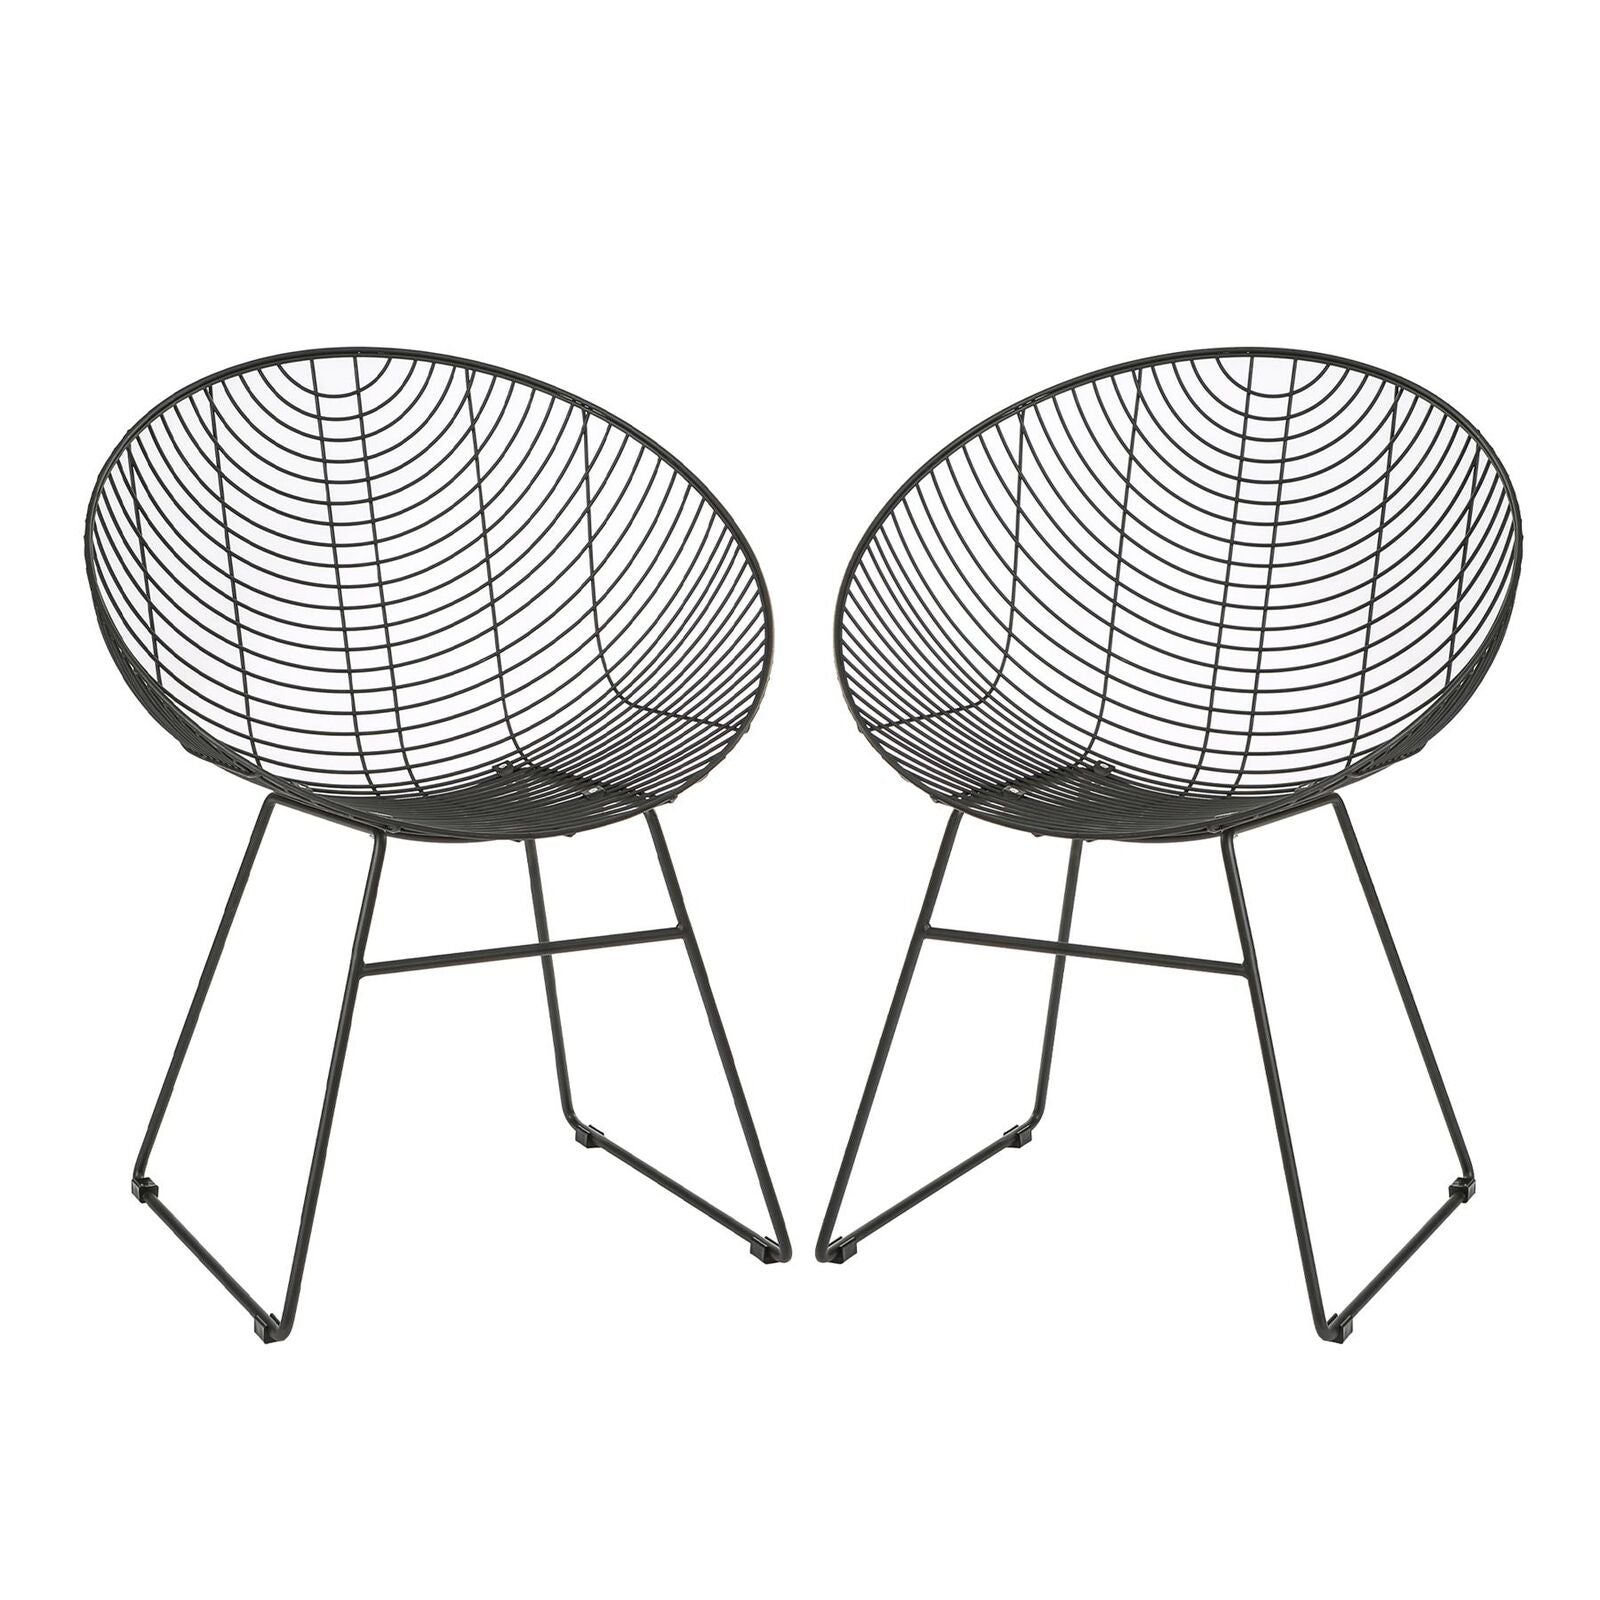 2x Metal Wire Lounge Chairs Industrial Desk Furniture Accent Chair Black